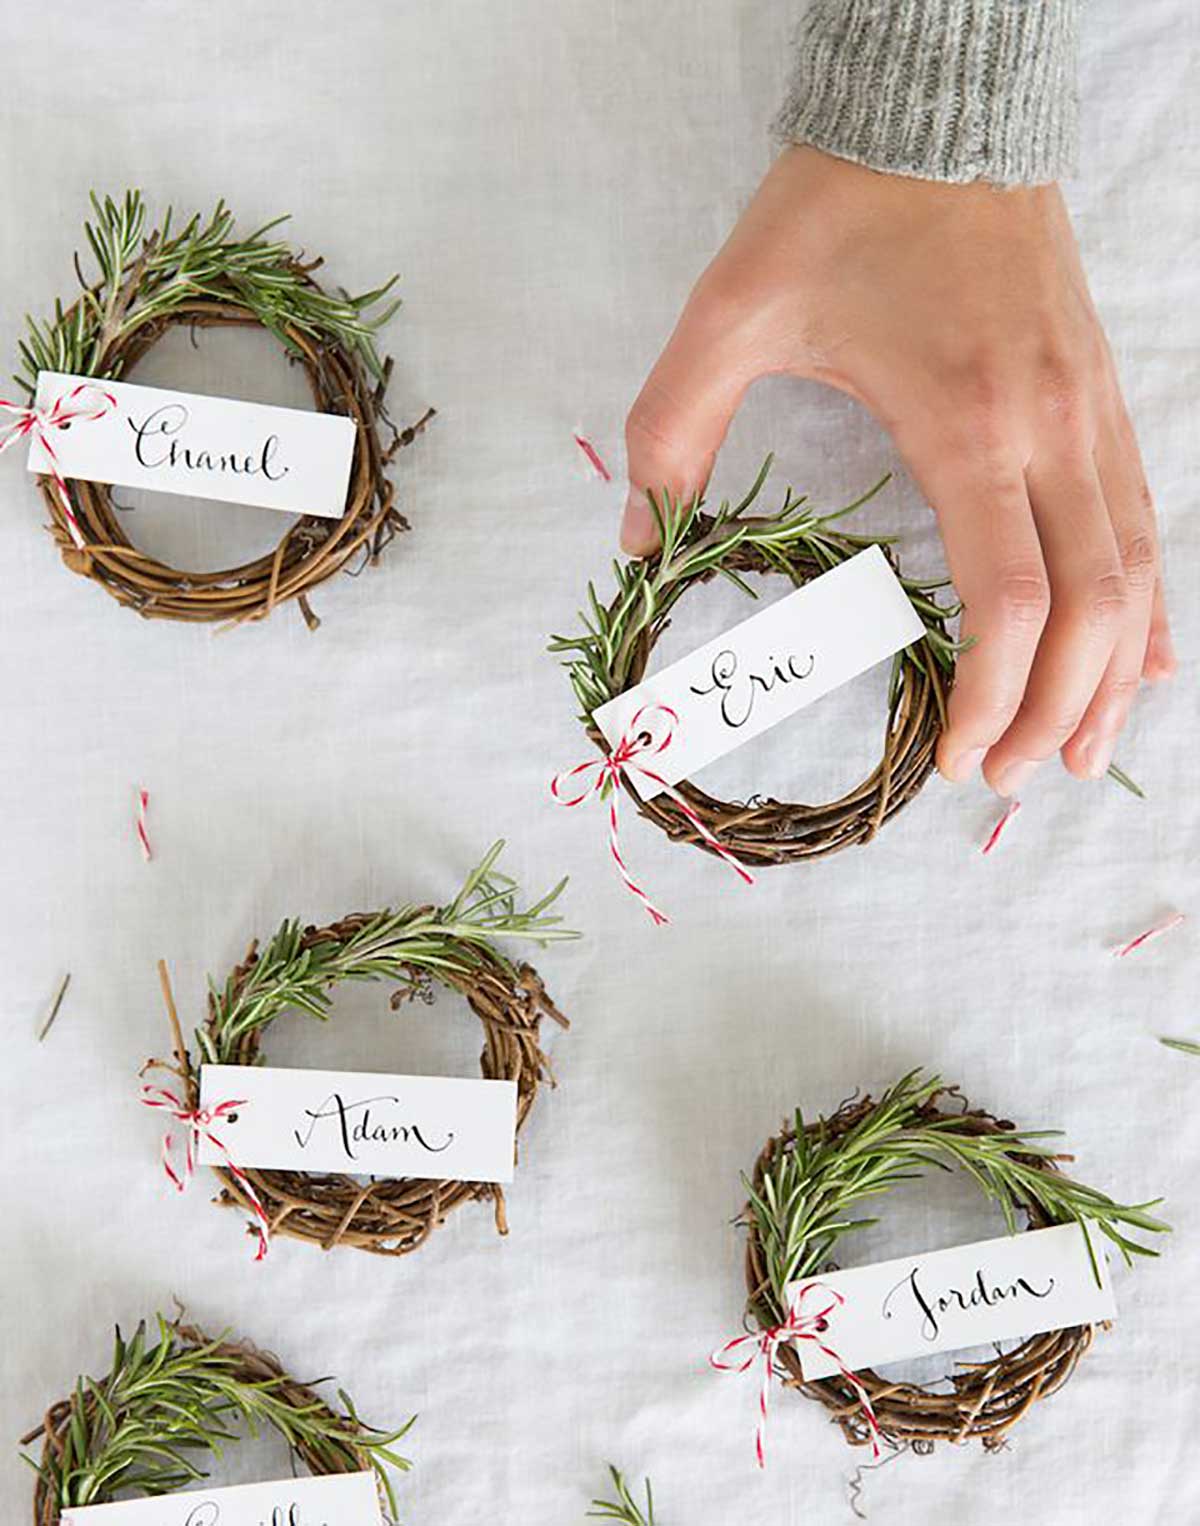 Other easy-to-make Christmas ornaments